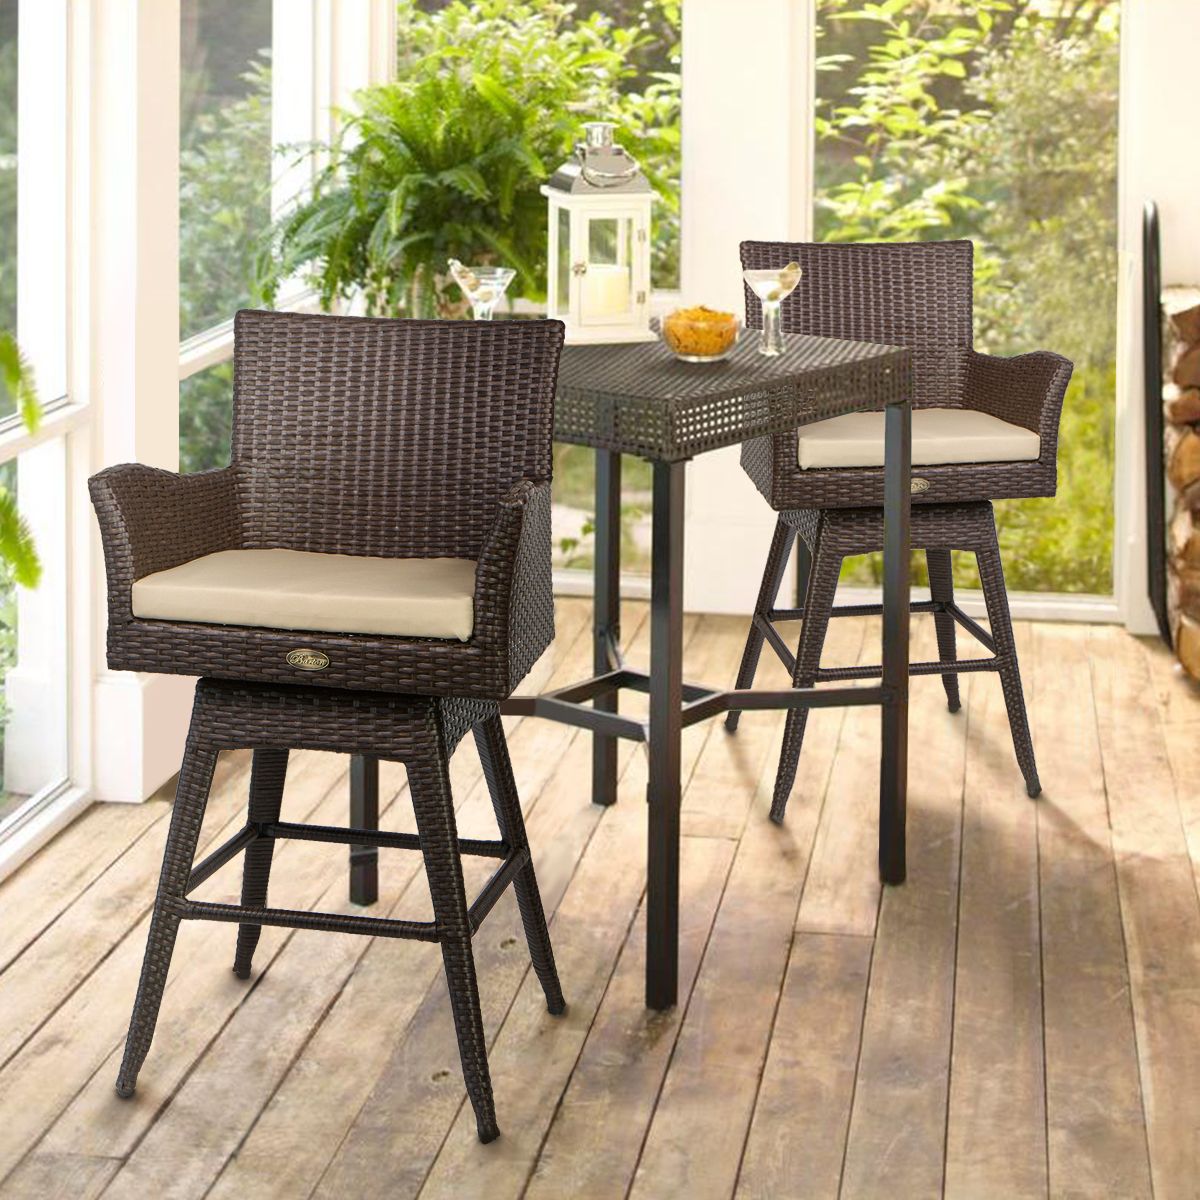 Fabric Outdoor Patio Sets Pertaining To Trendy Barton Outdoor Patio Swivel Bar Stool Armrest With Footrest Rattan (View 14 of 15)